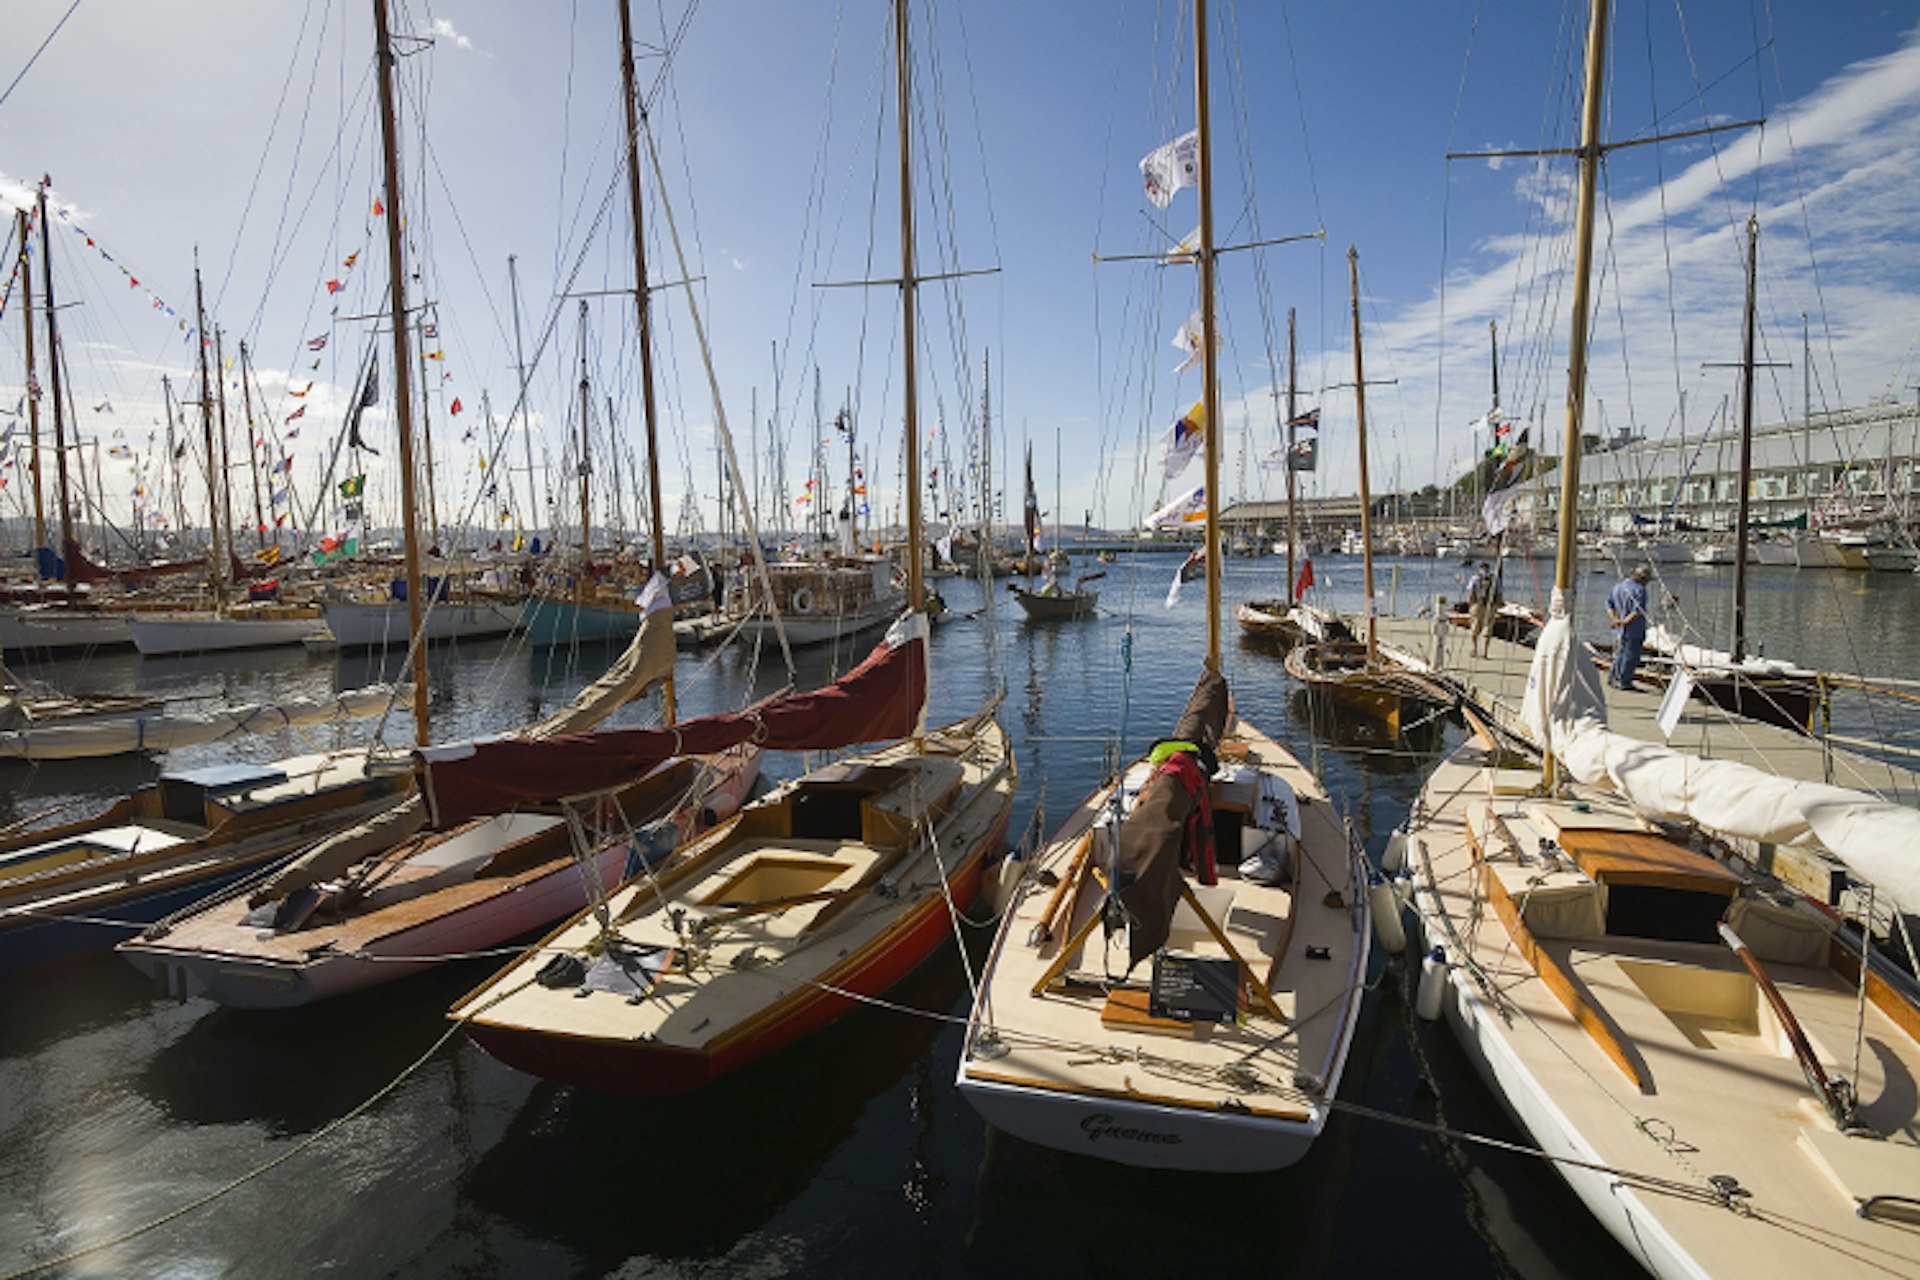 Sailing boats at Sullivan Cove / Image by Andrew Watson / Getty Images